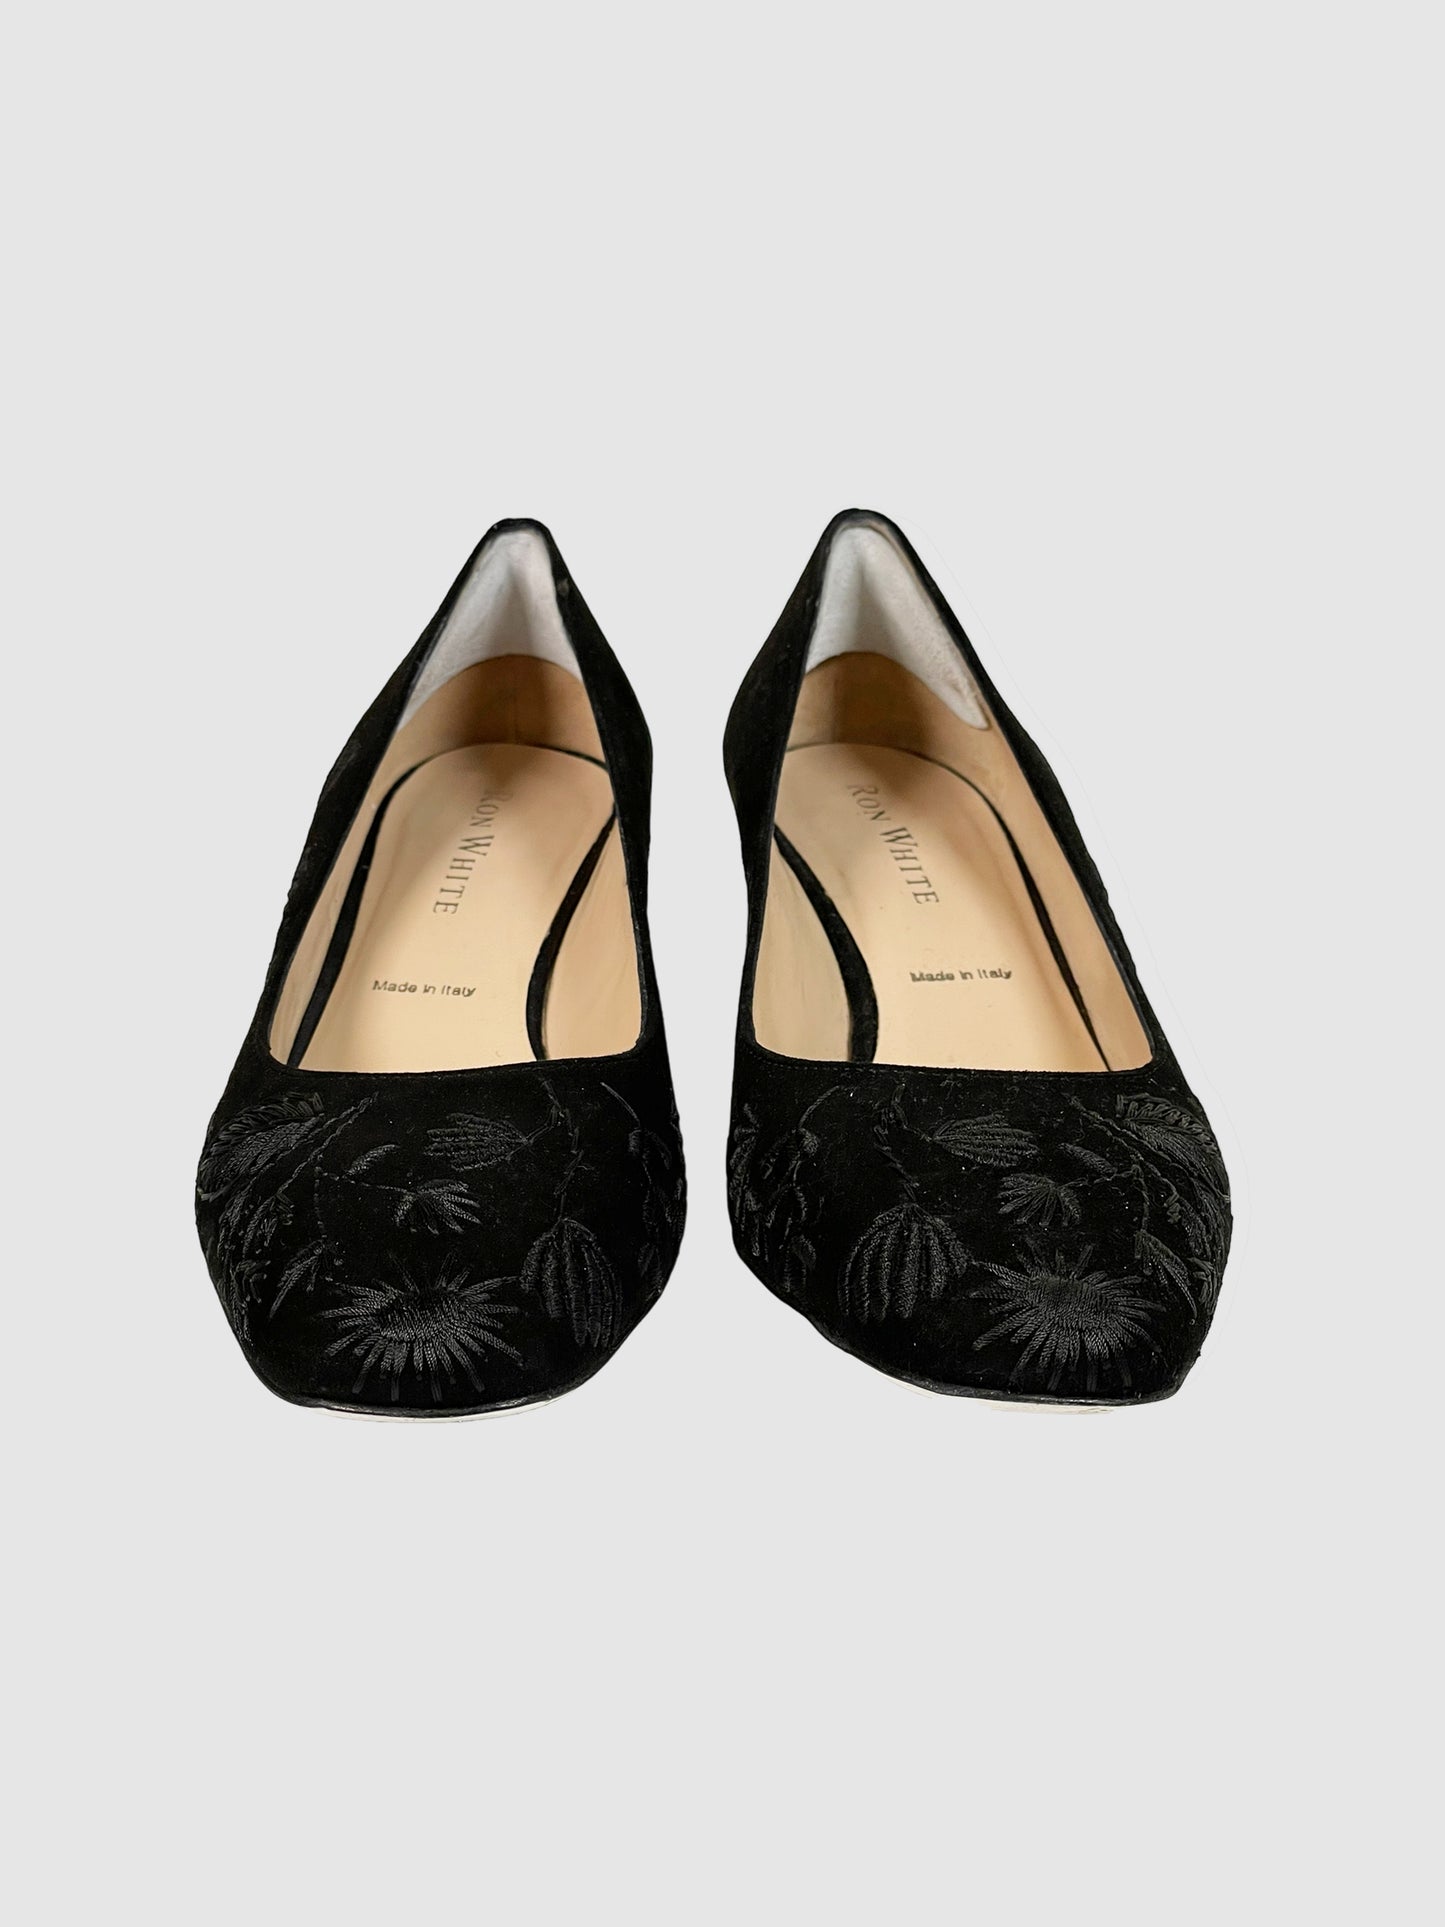 Ron White Suede Embroidered Pumps - Size 37.5